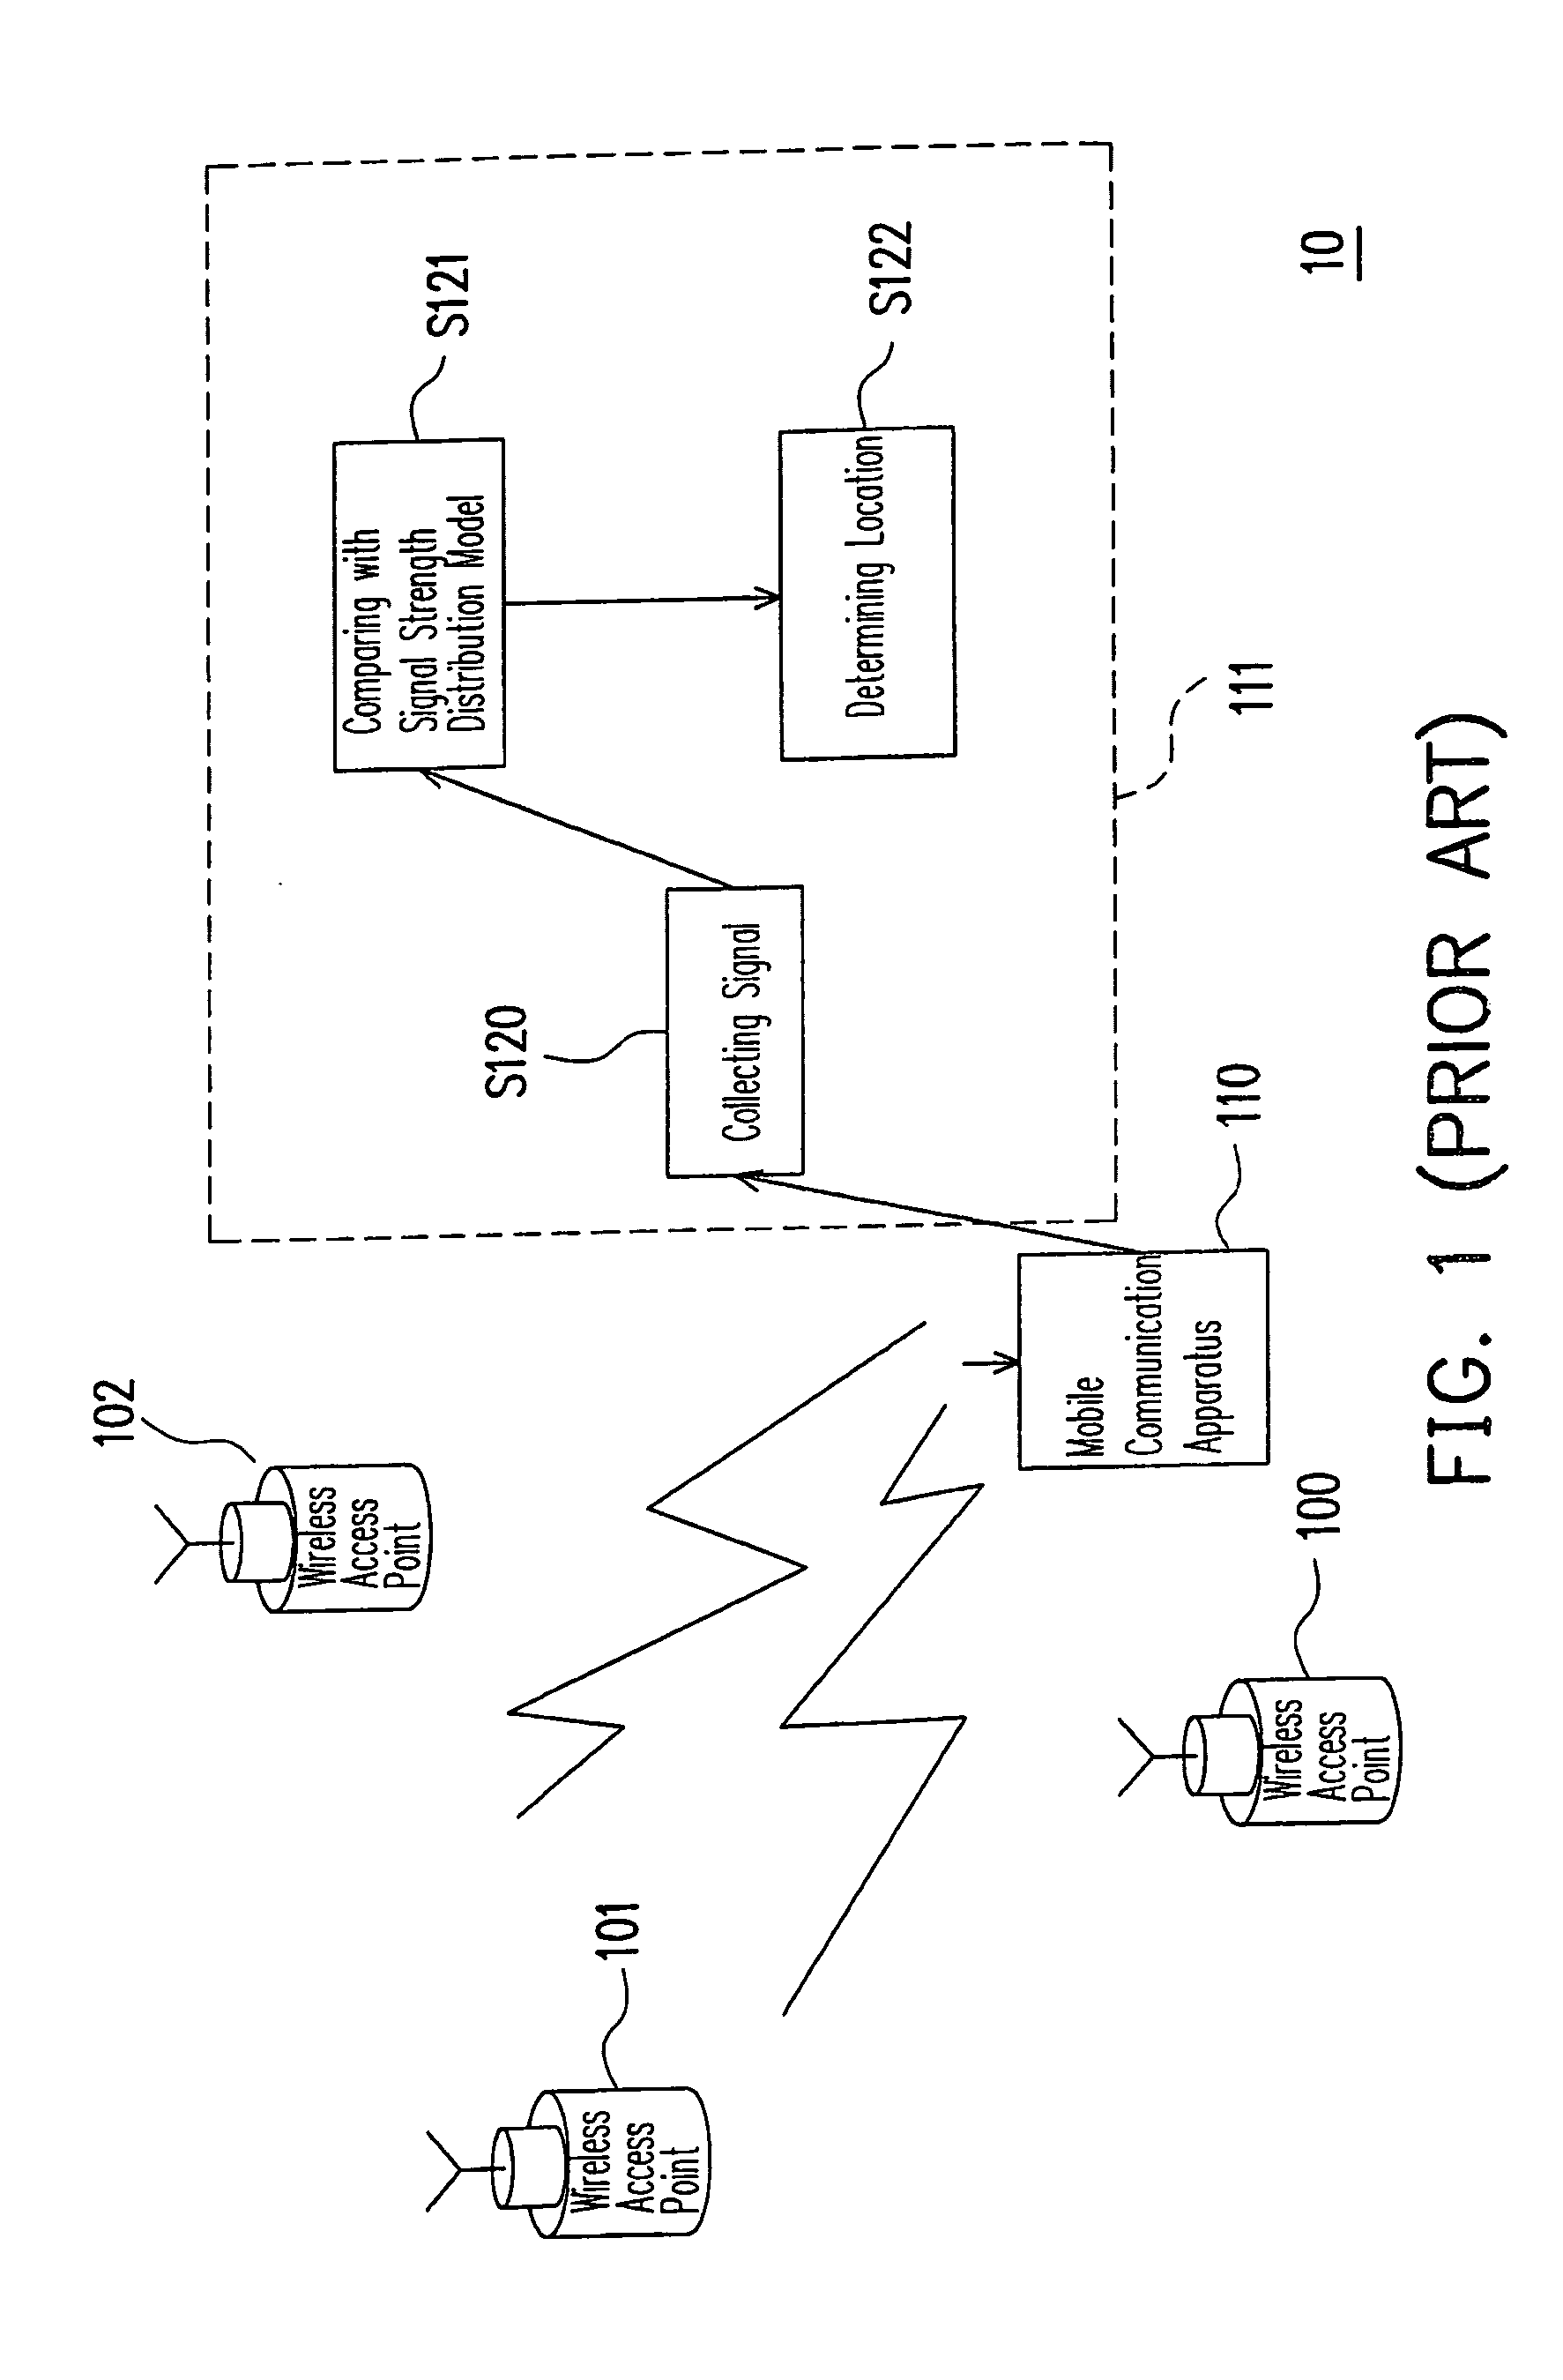 Apparatus and method for transforming signal strength of wireless positioning system